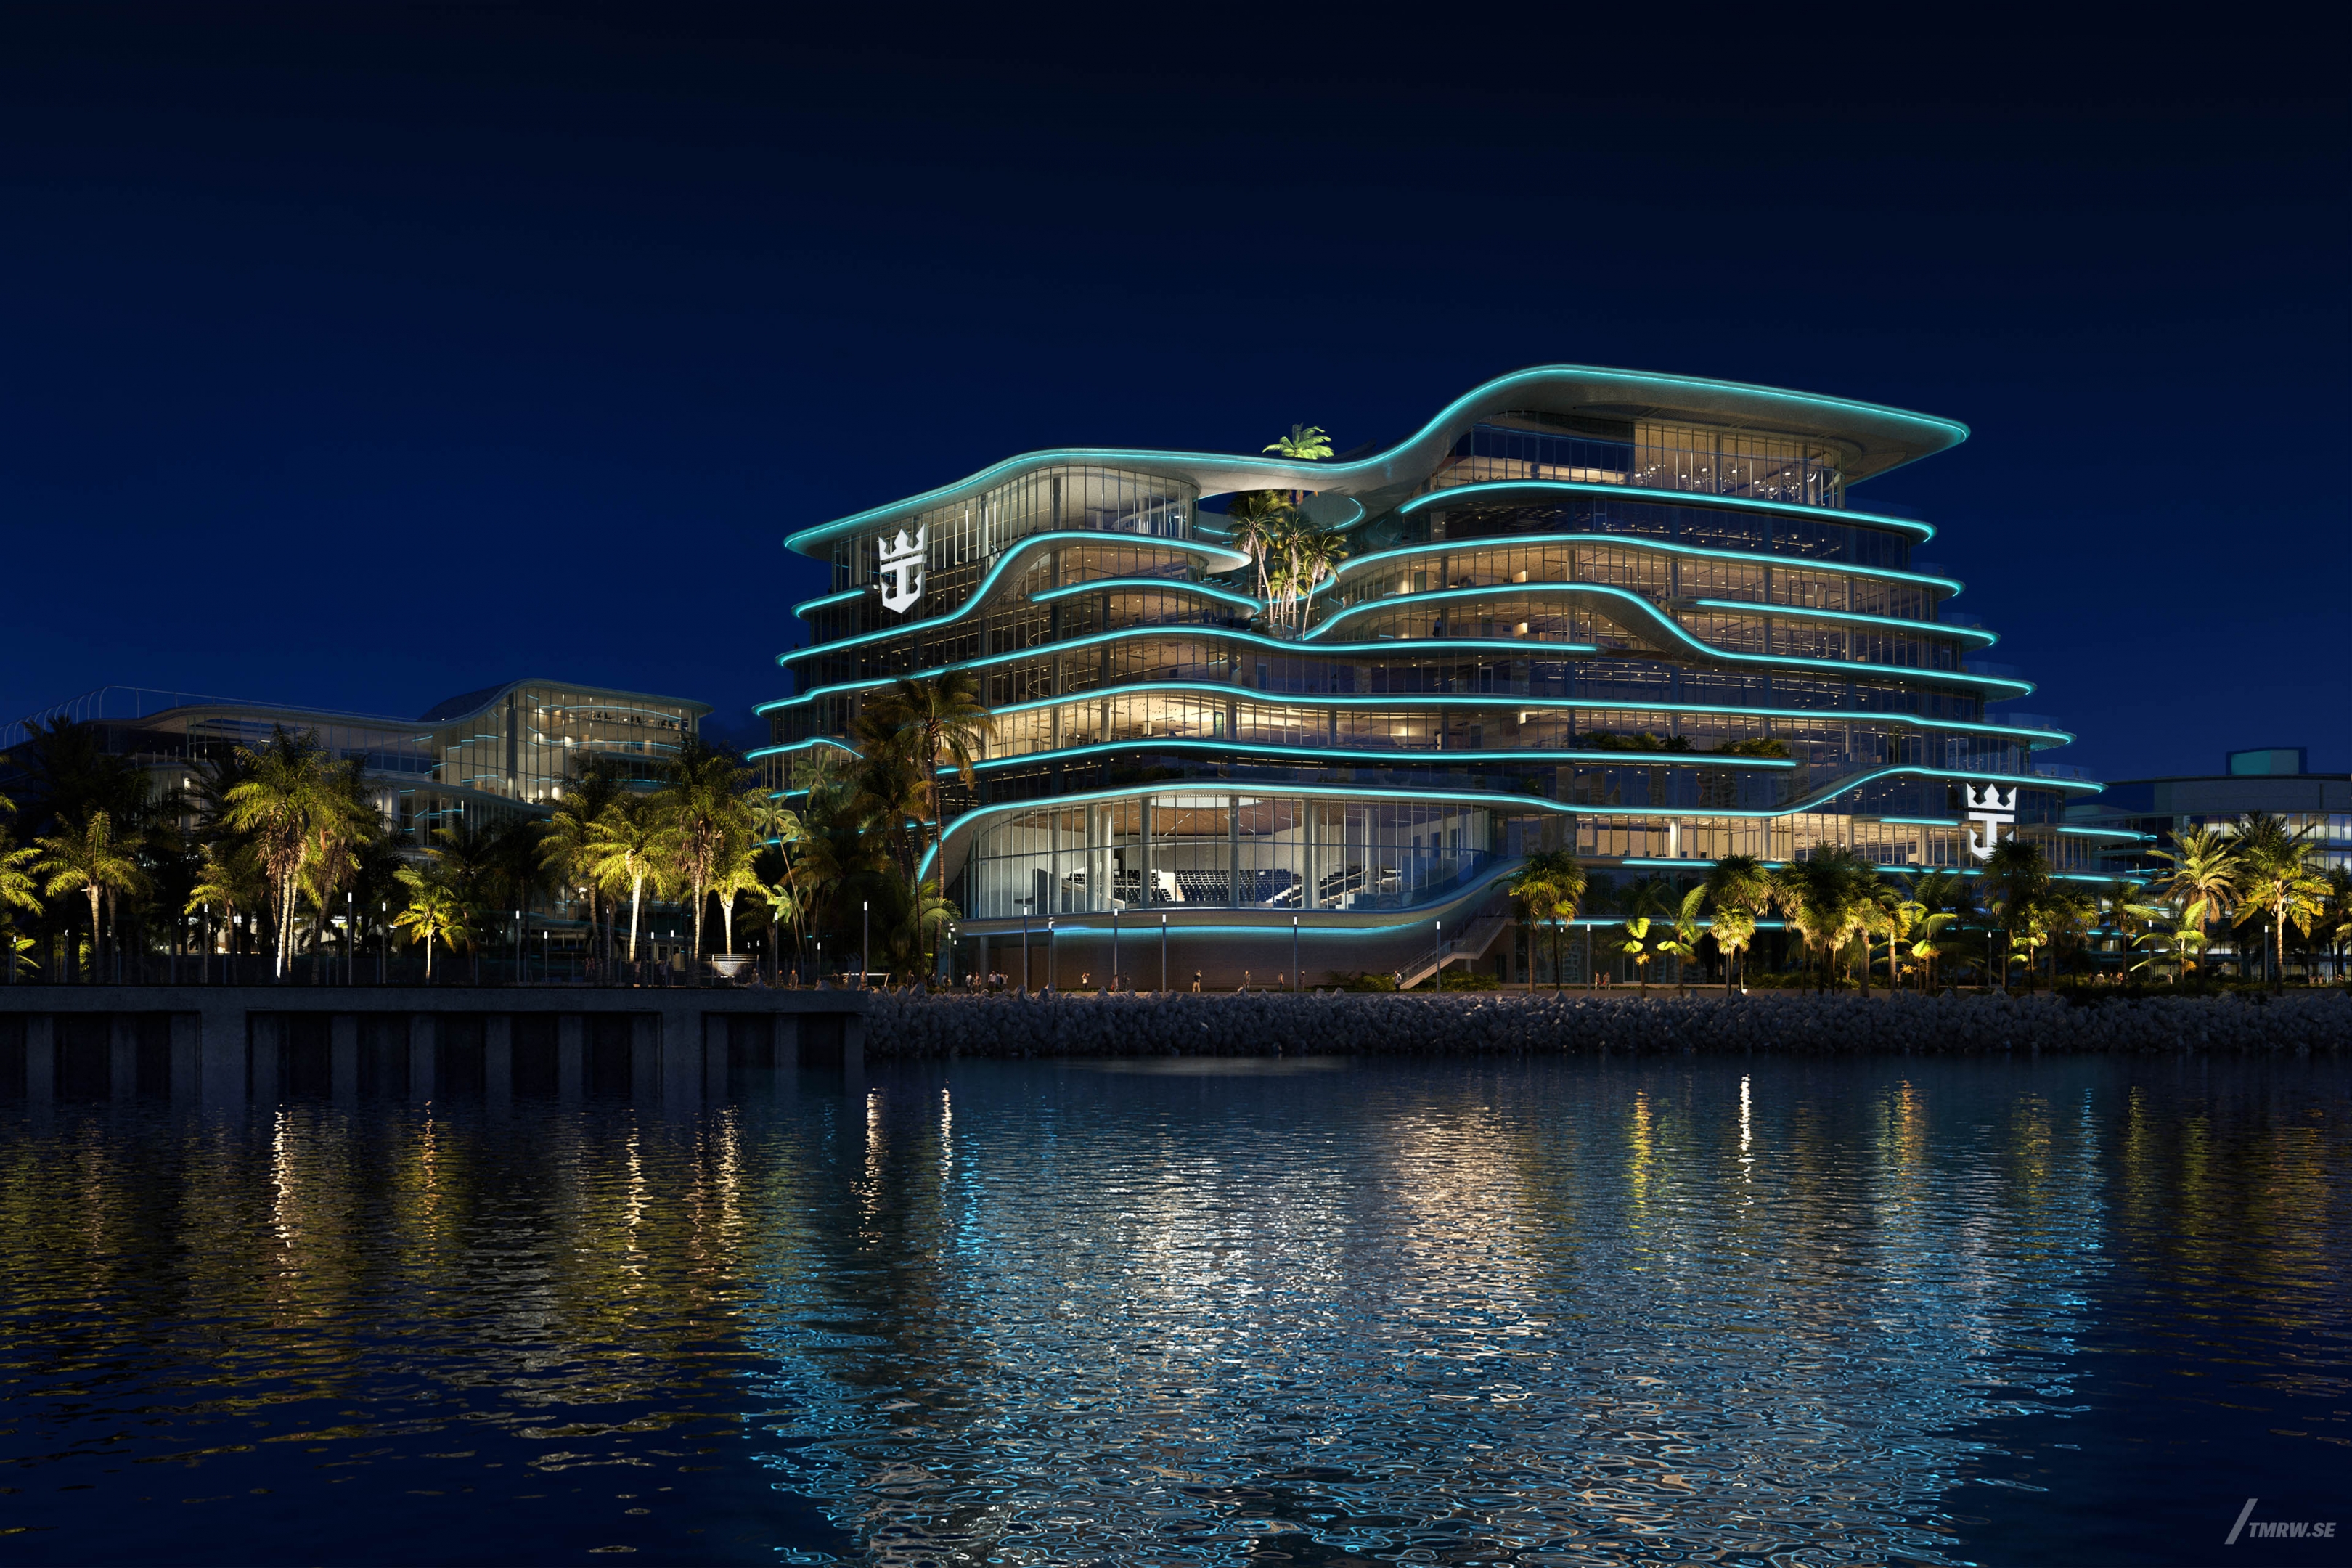 Architectural visualization of Royal Caribbean for HOK, an office building during night light from a sea view.